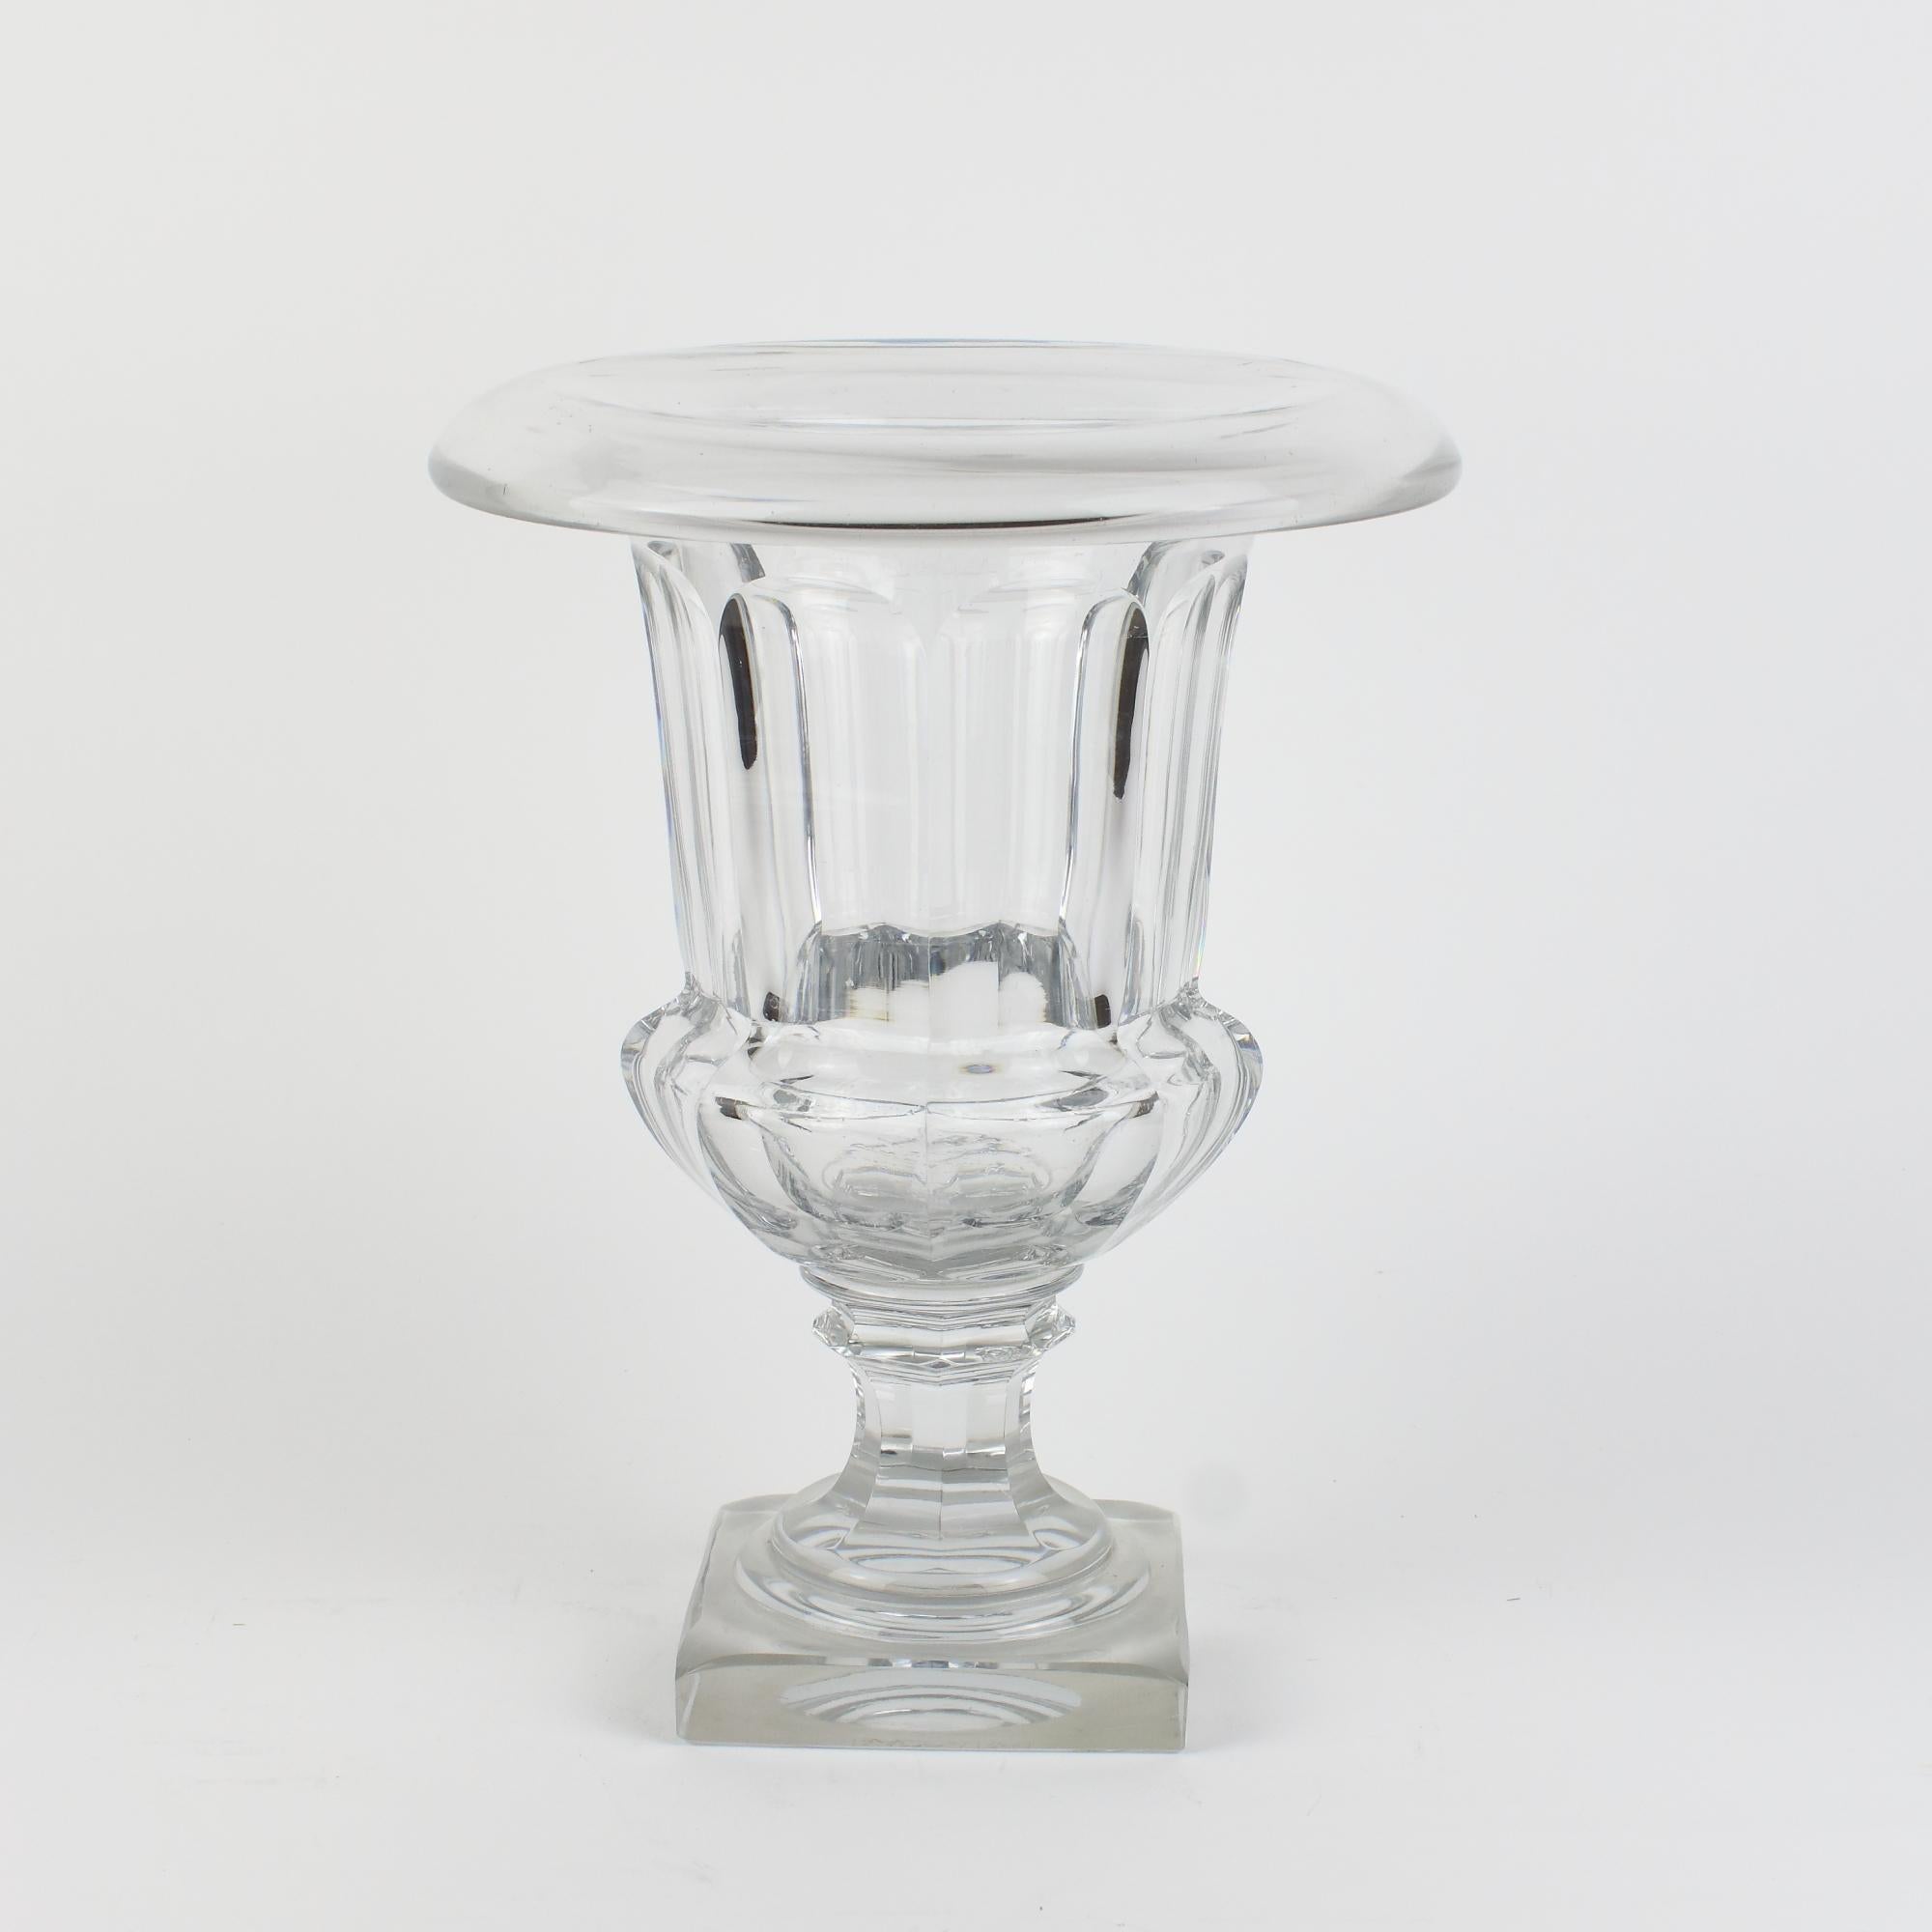 Early 20th century crystal glass neoclassical medici krater vase.

Heavy faceted crystal glass vase of neoclassical krater shape with round faceted base on square plinth and broad rim. At the bottom of the base pseudo signature: 